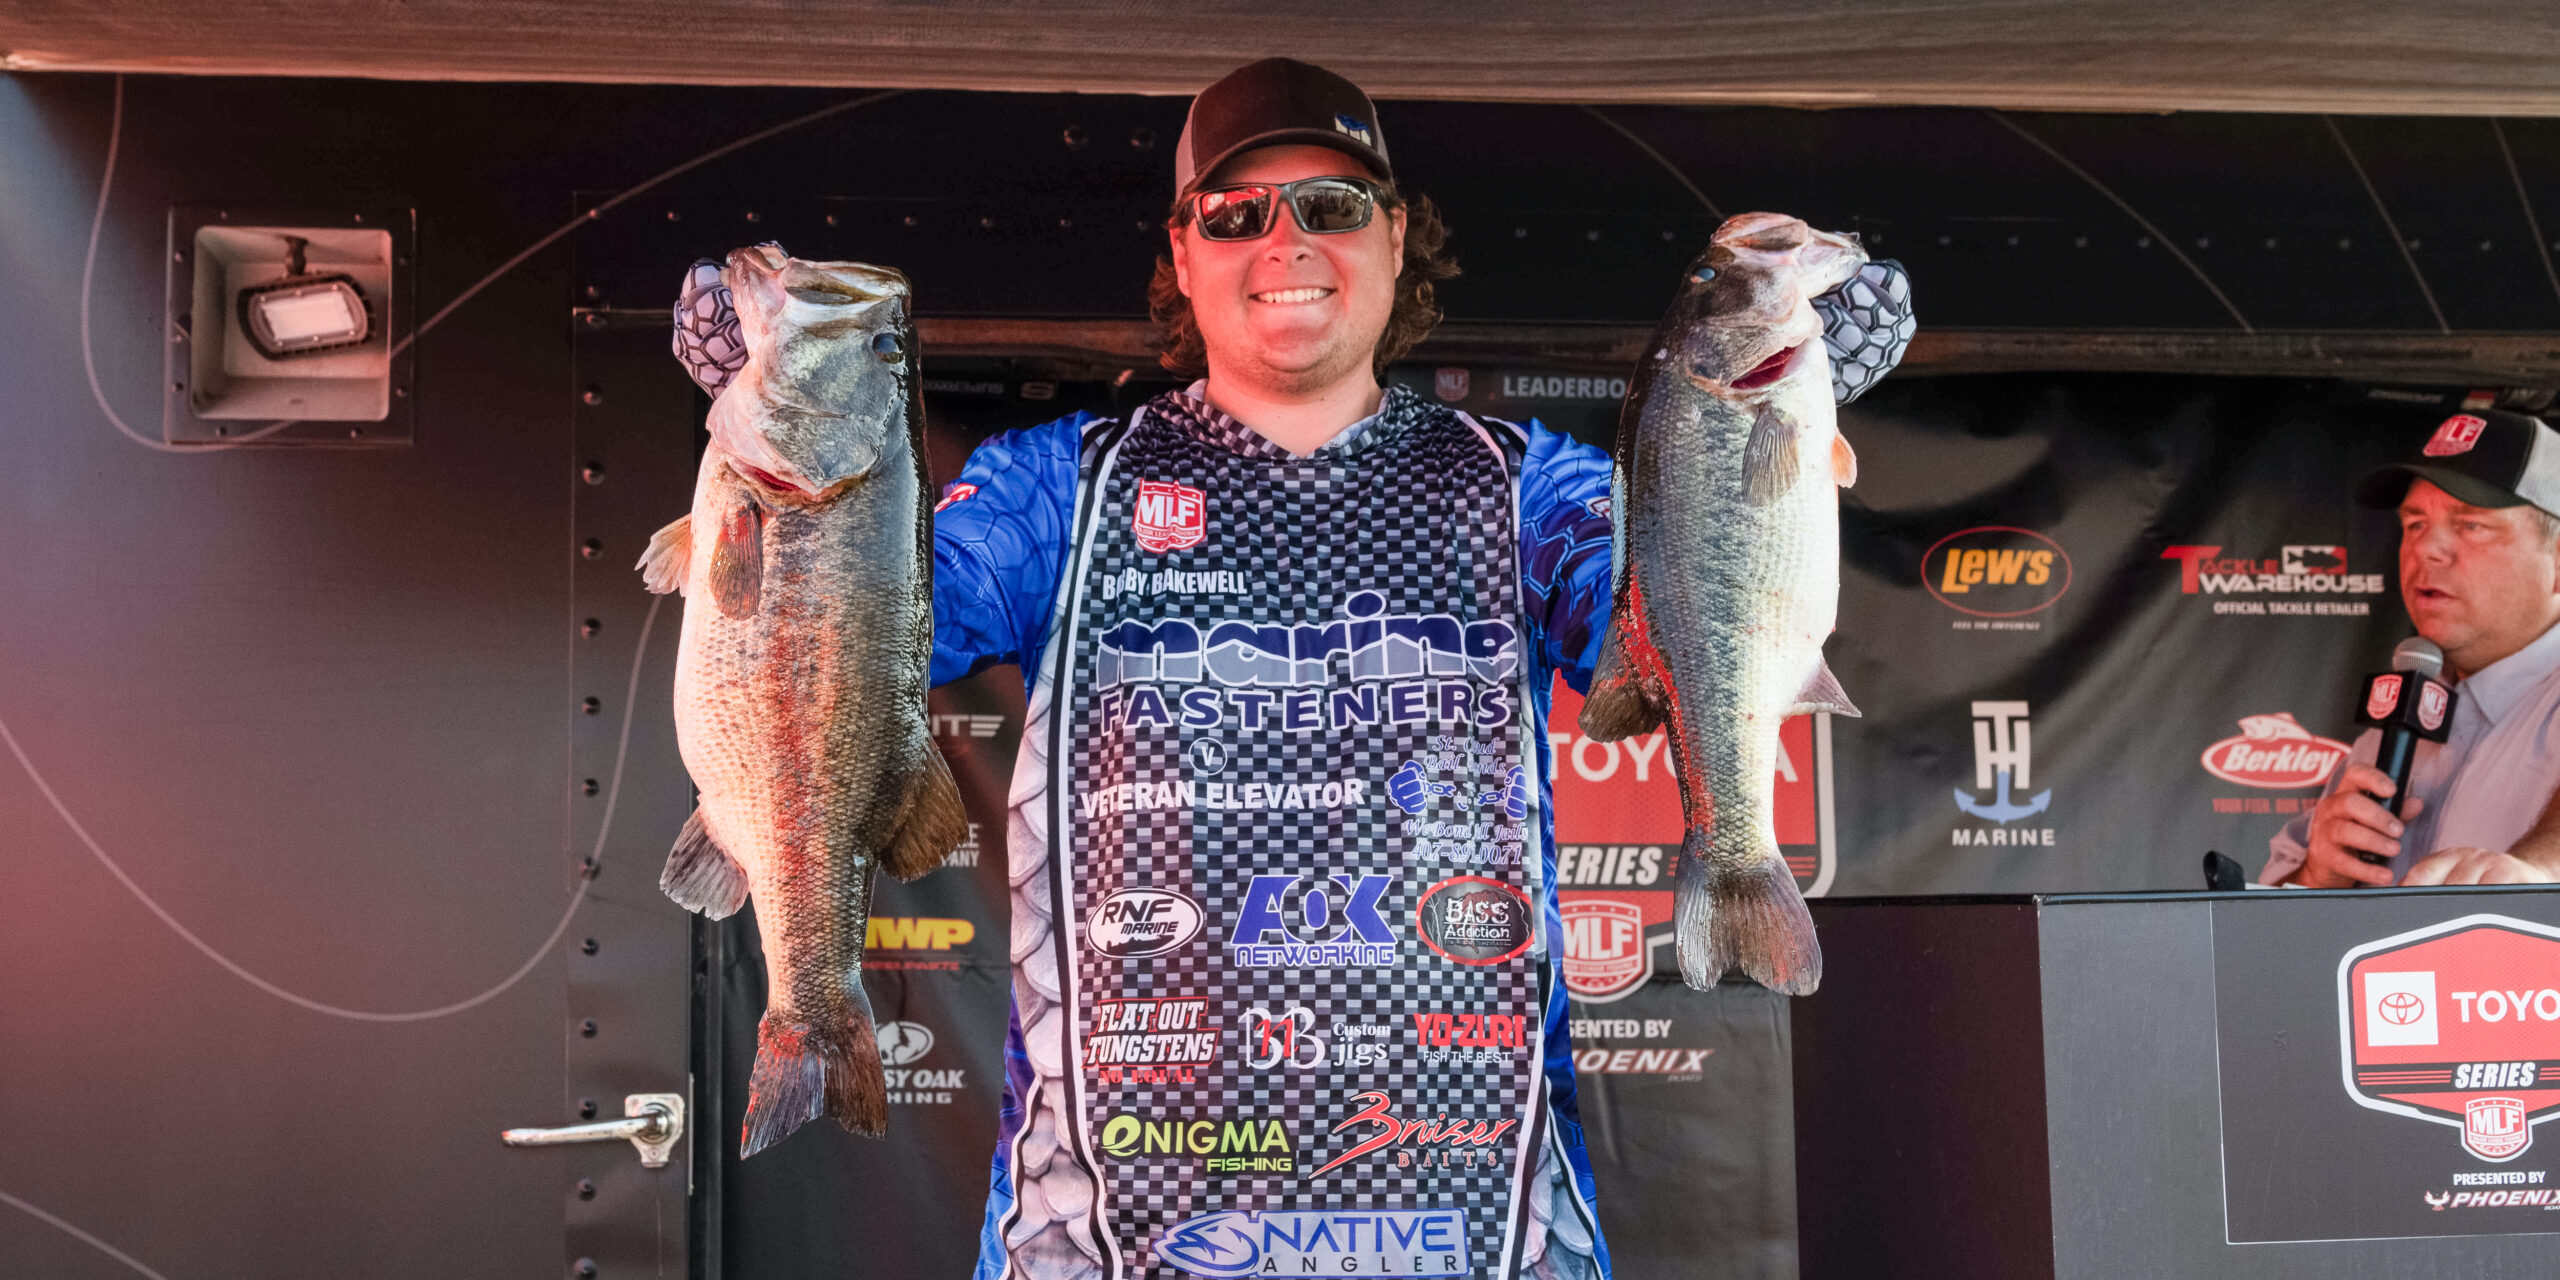 Bakewell racks up 23-2 on tough Day 1 at Lake Okeechobee, Crowder second  with 21-8 - Major League Fishing